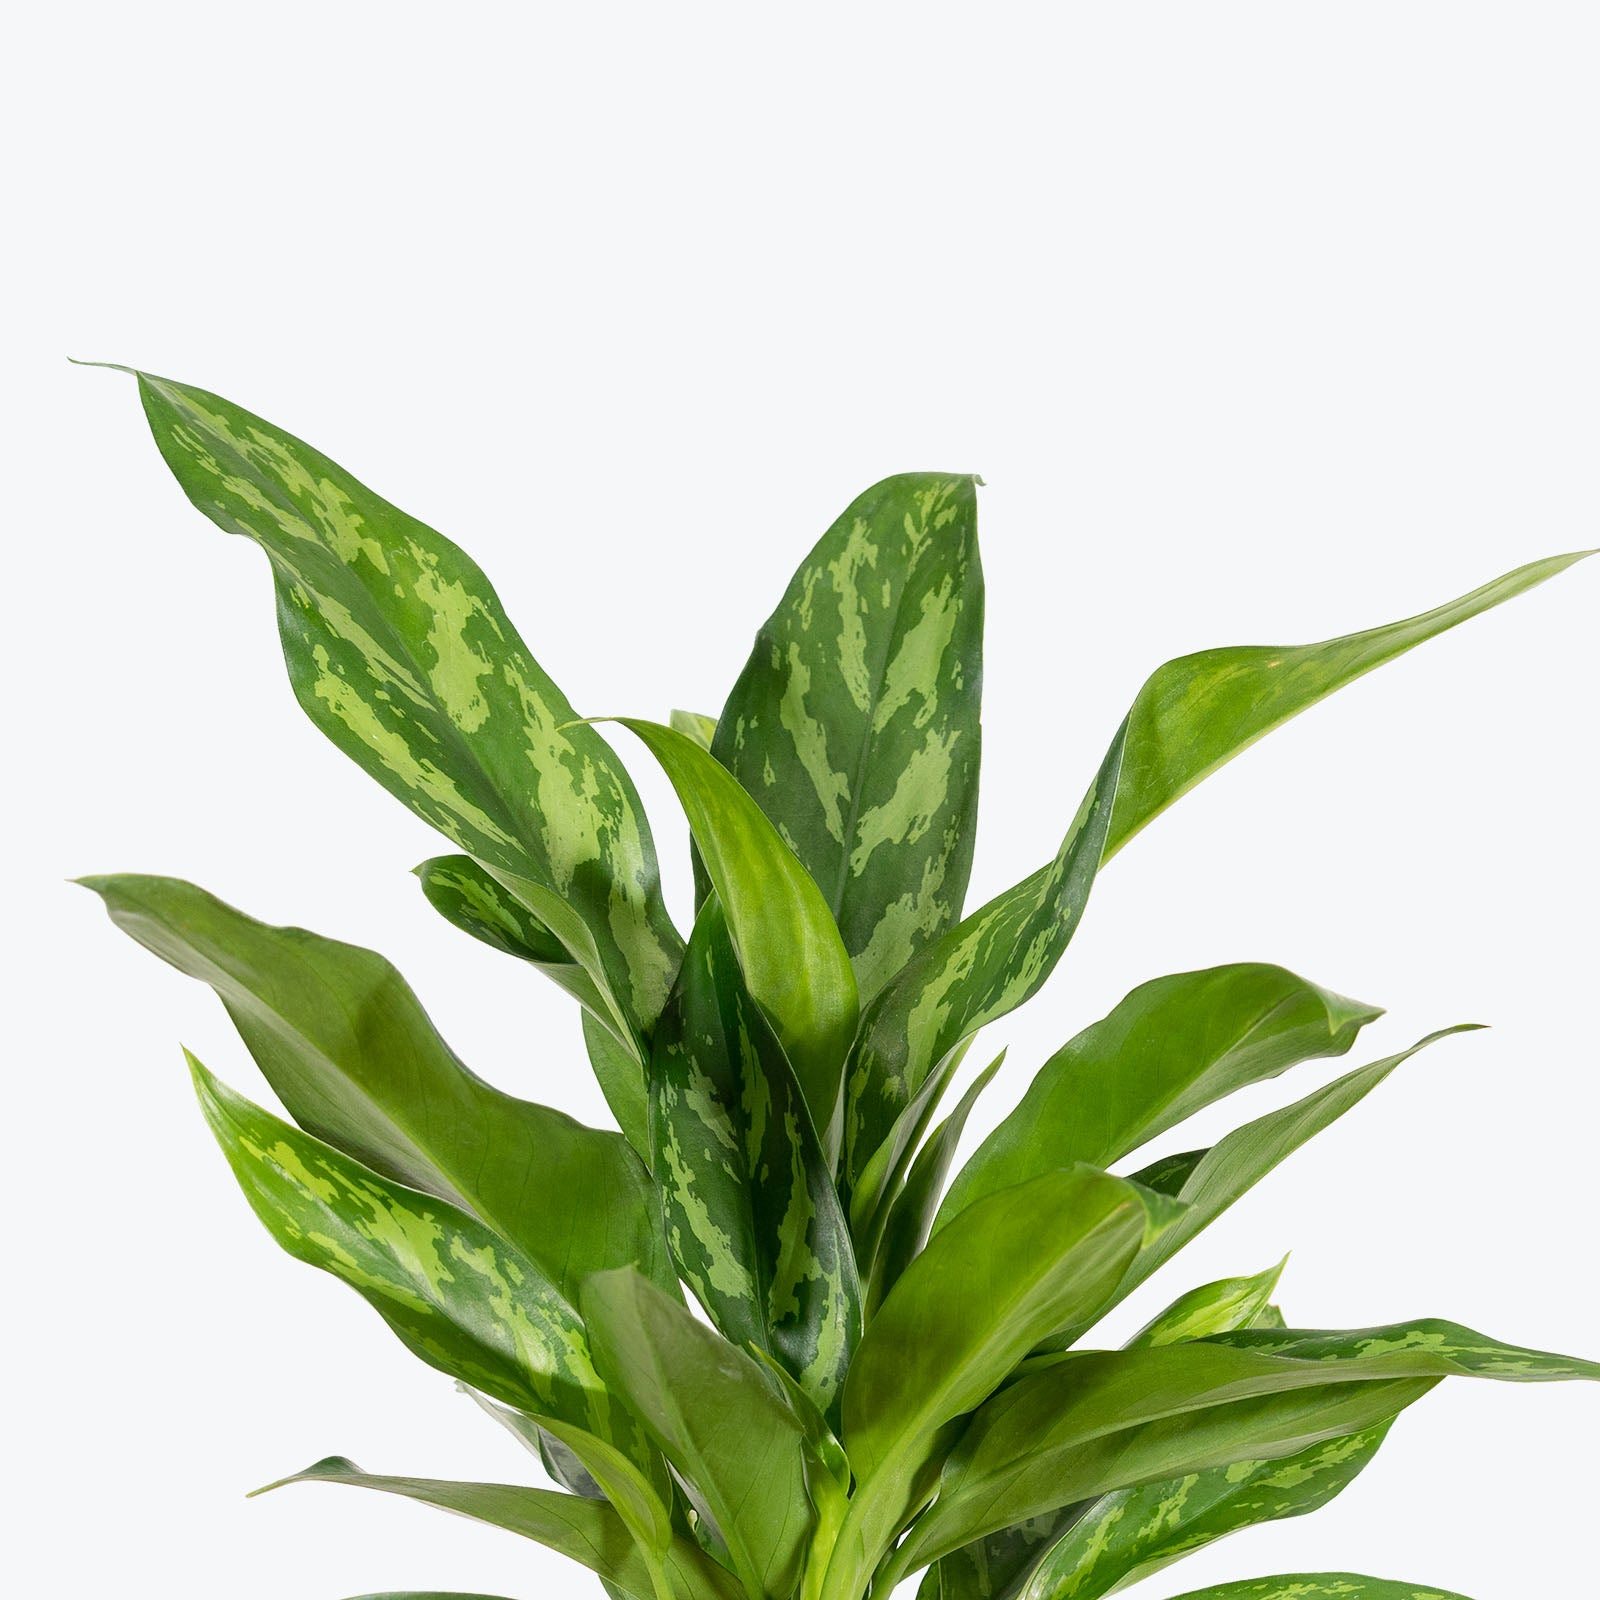 Aglaonema Chinese Evergreen Maria | Care Guide and Pro Tips - Delivery from Toronto across Canada - JOMO Studio